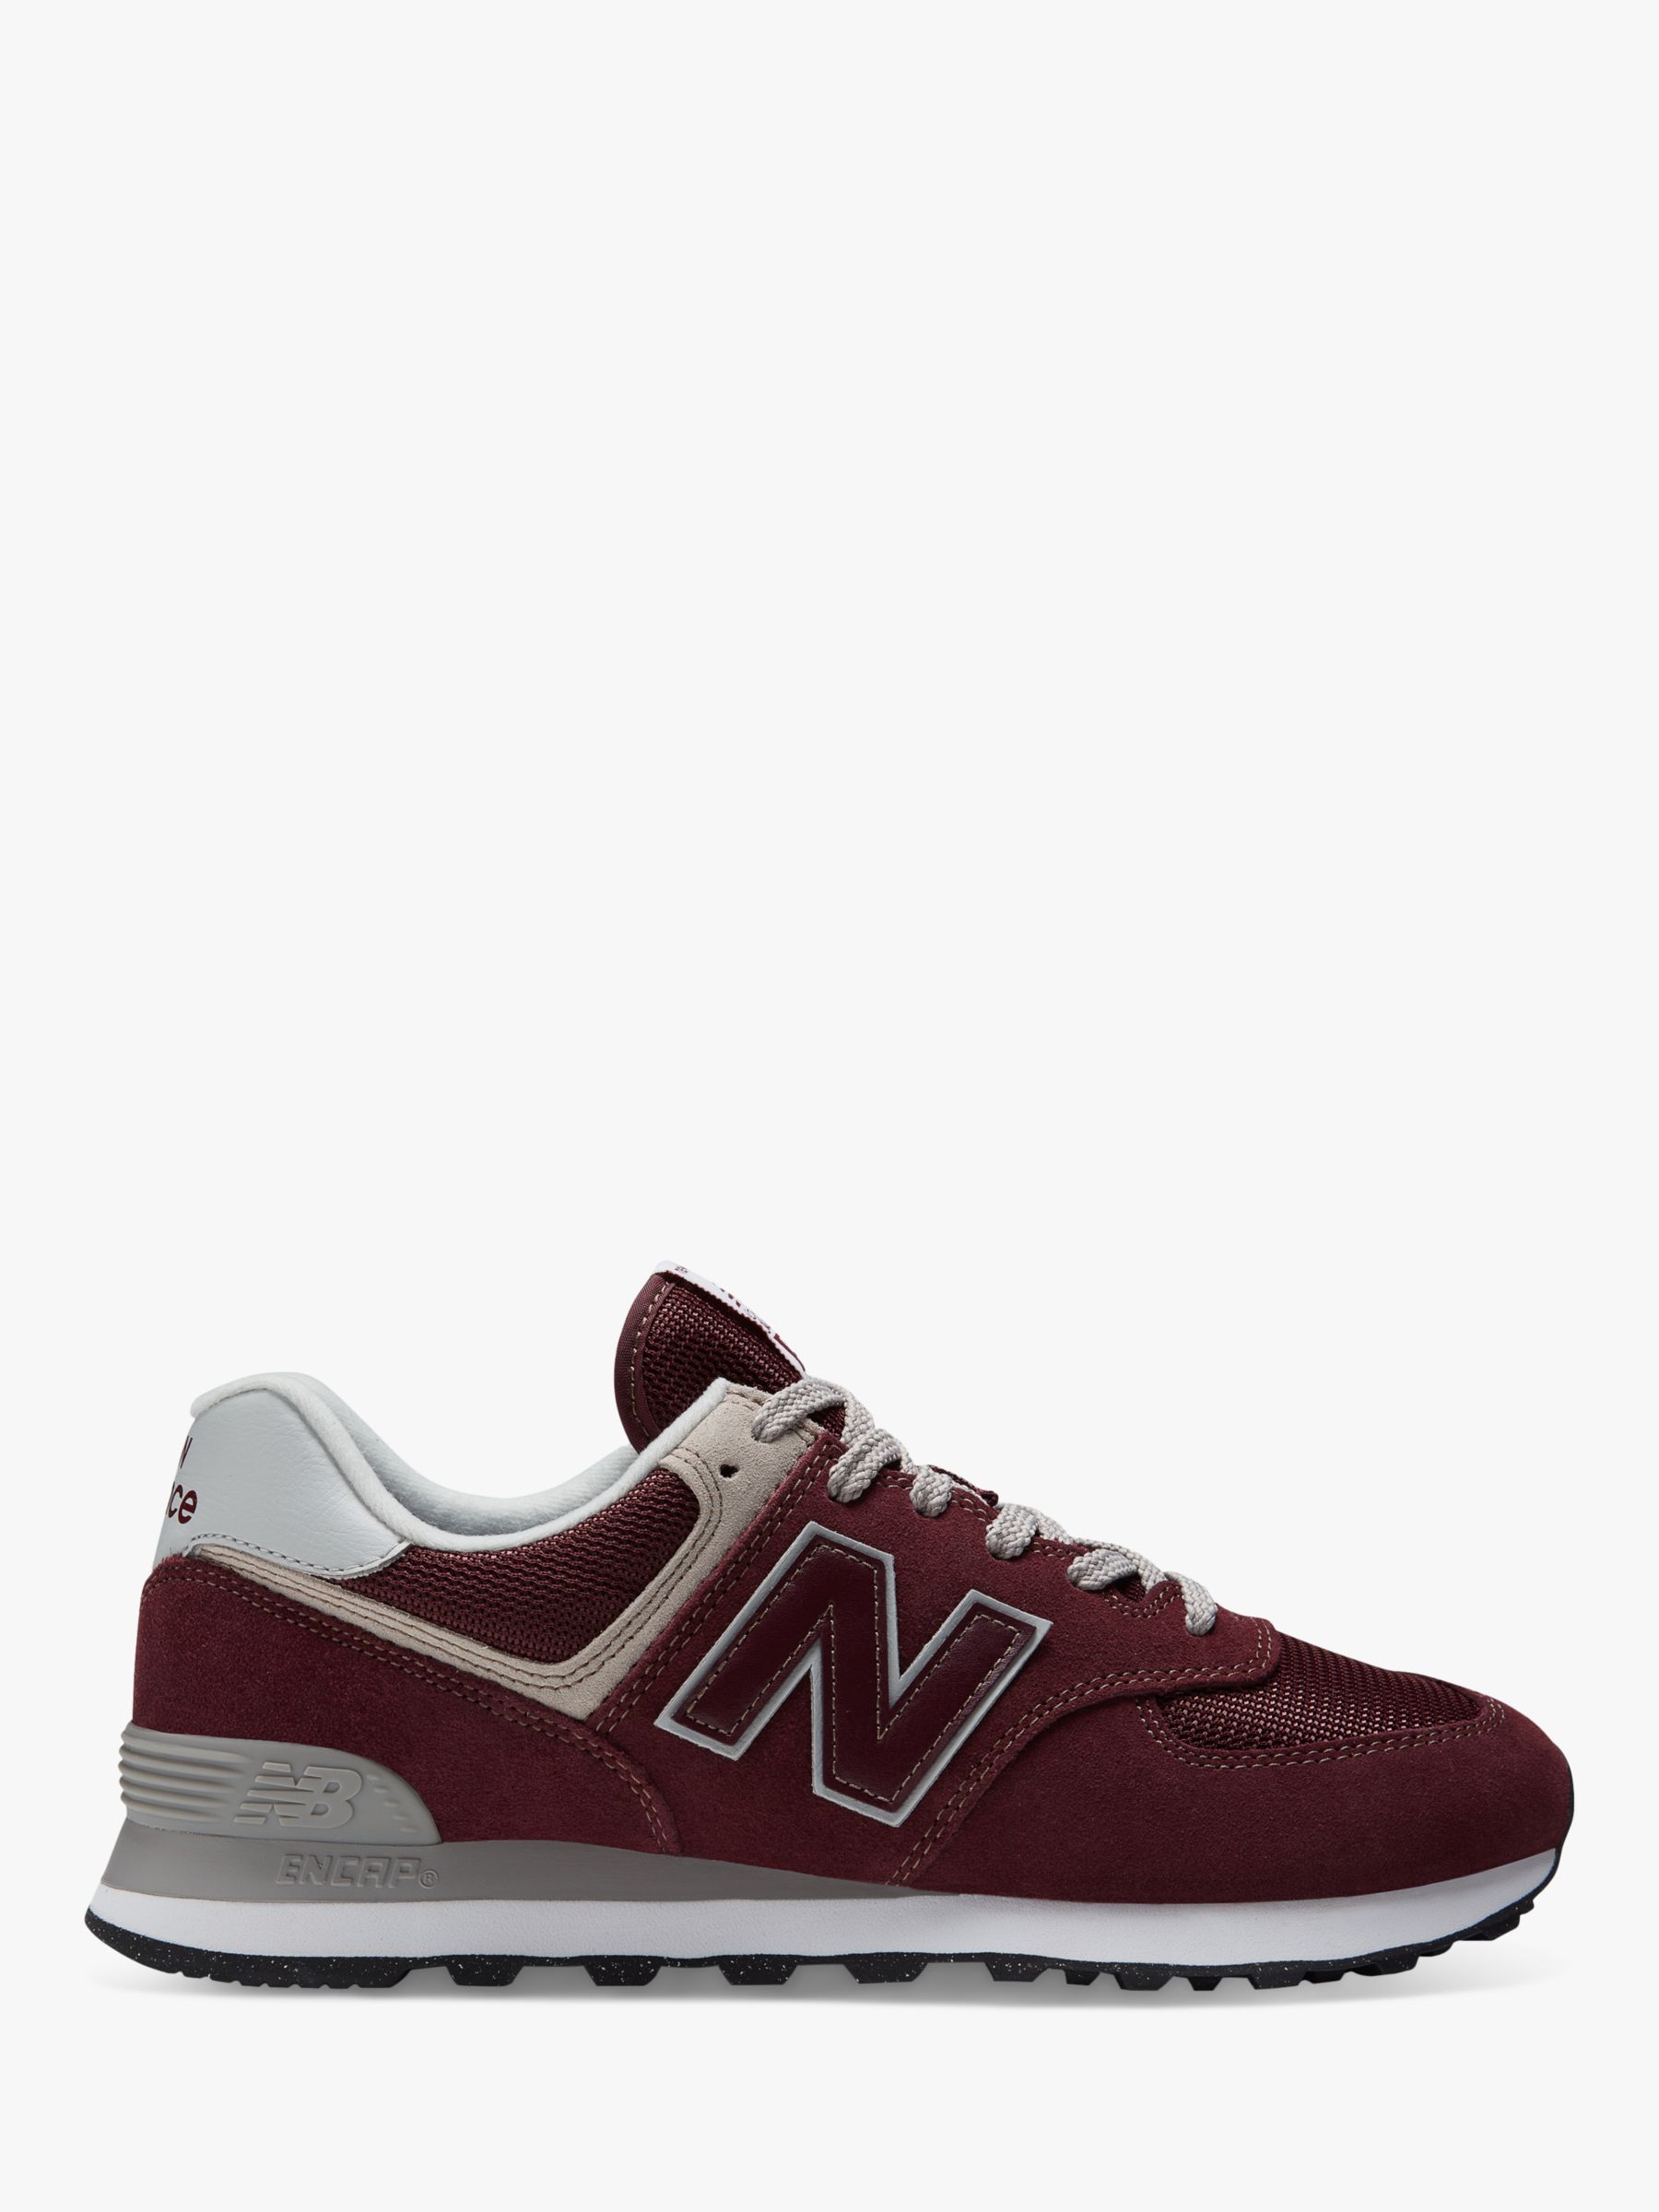 Excéntrico Sumergido litro New Balance 574 Suede Trainers, Red at John Lewis & Partners